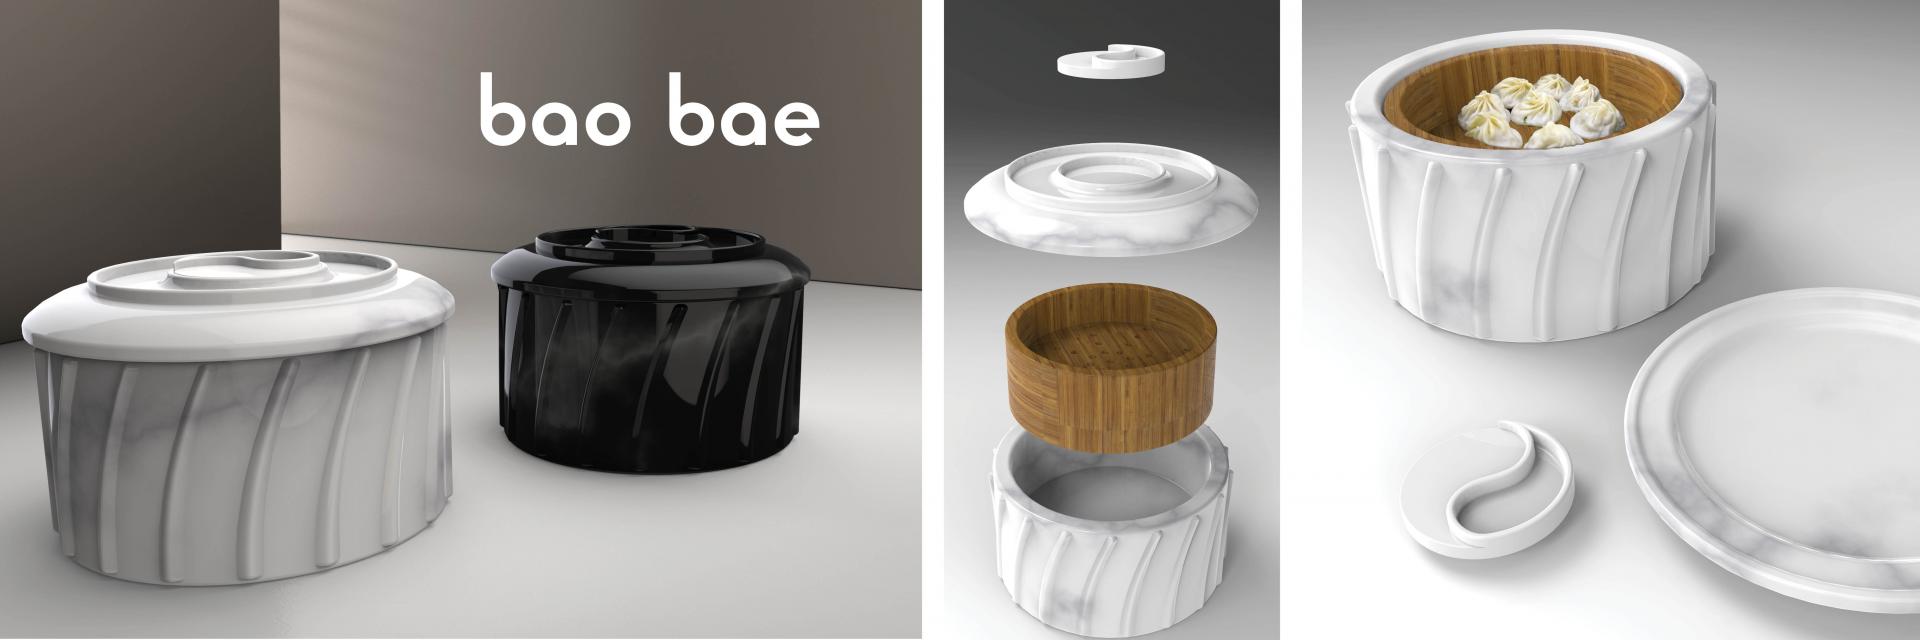 Renders of a large cylindrical dish set